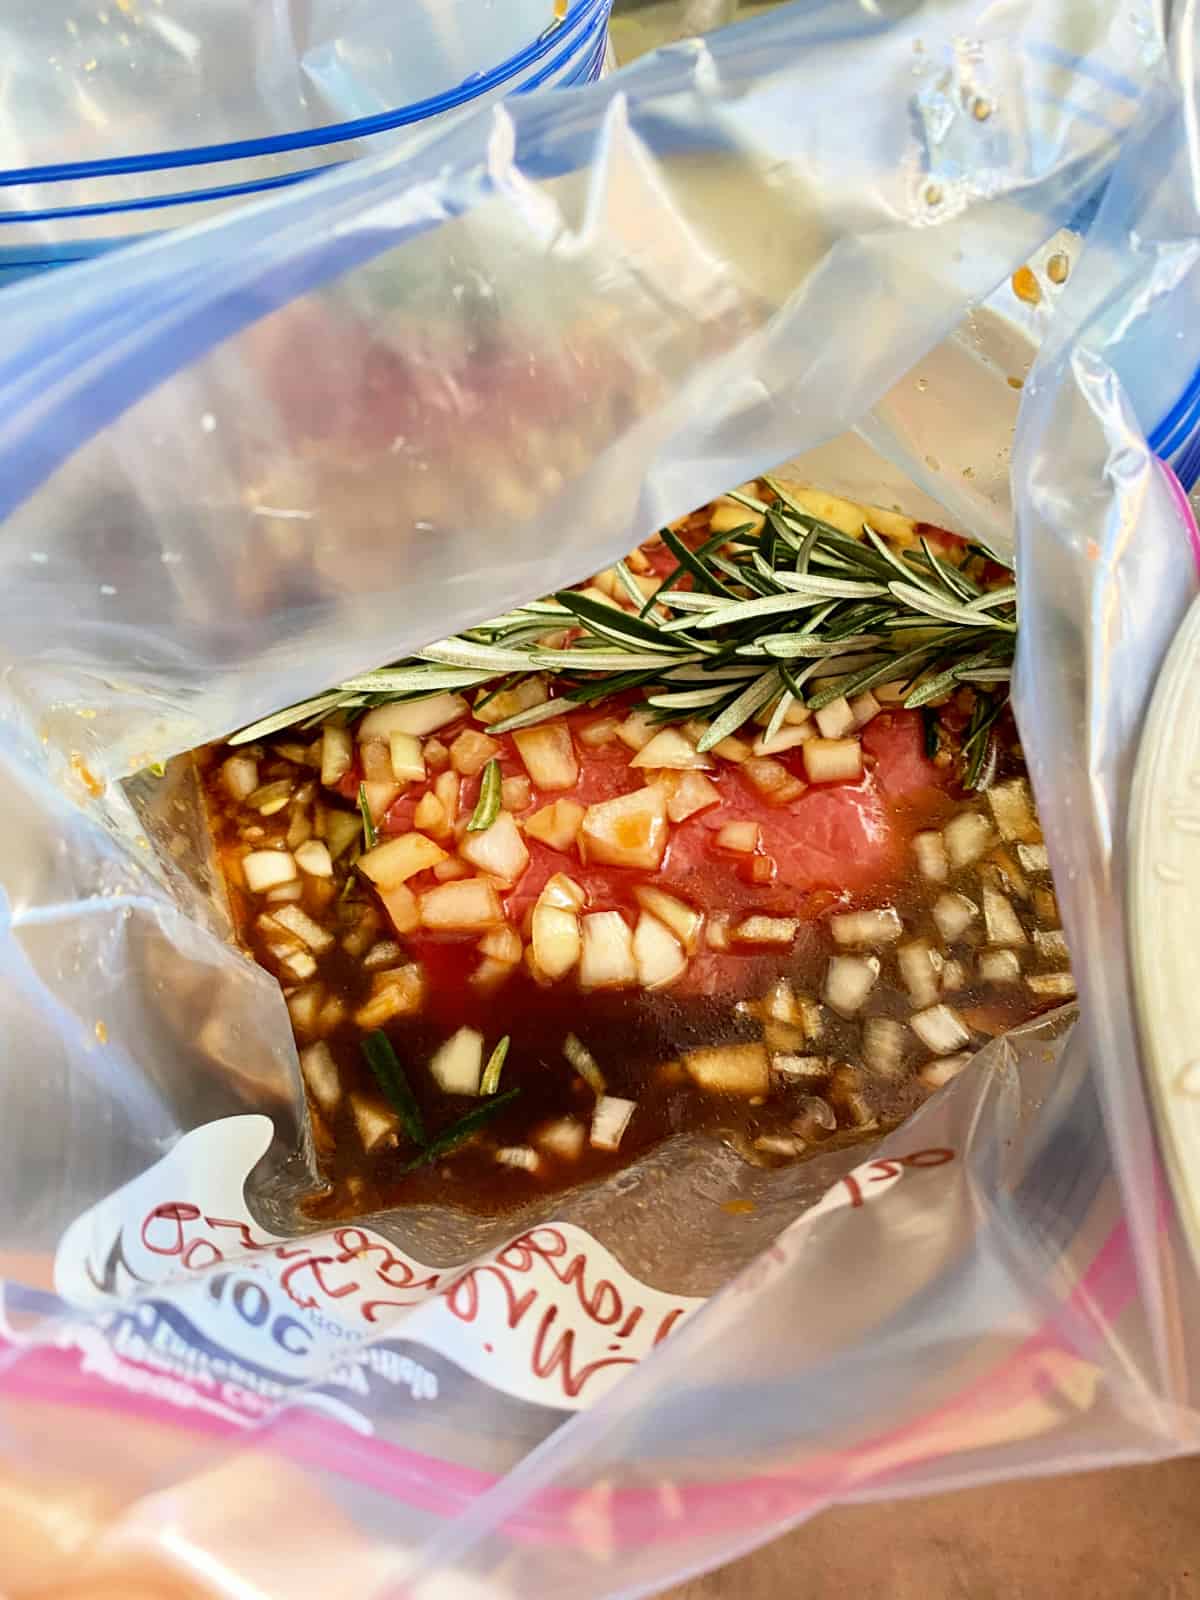 Plastic bag with steak, onions, rosemary and marinade.